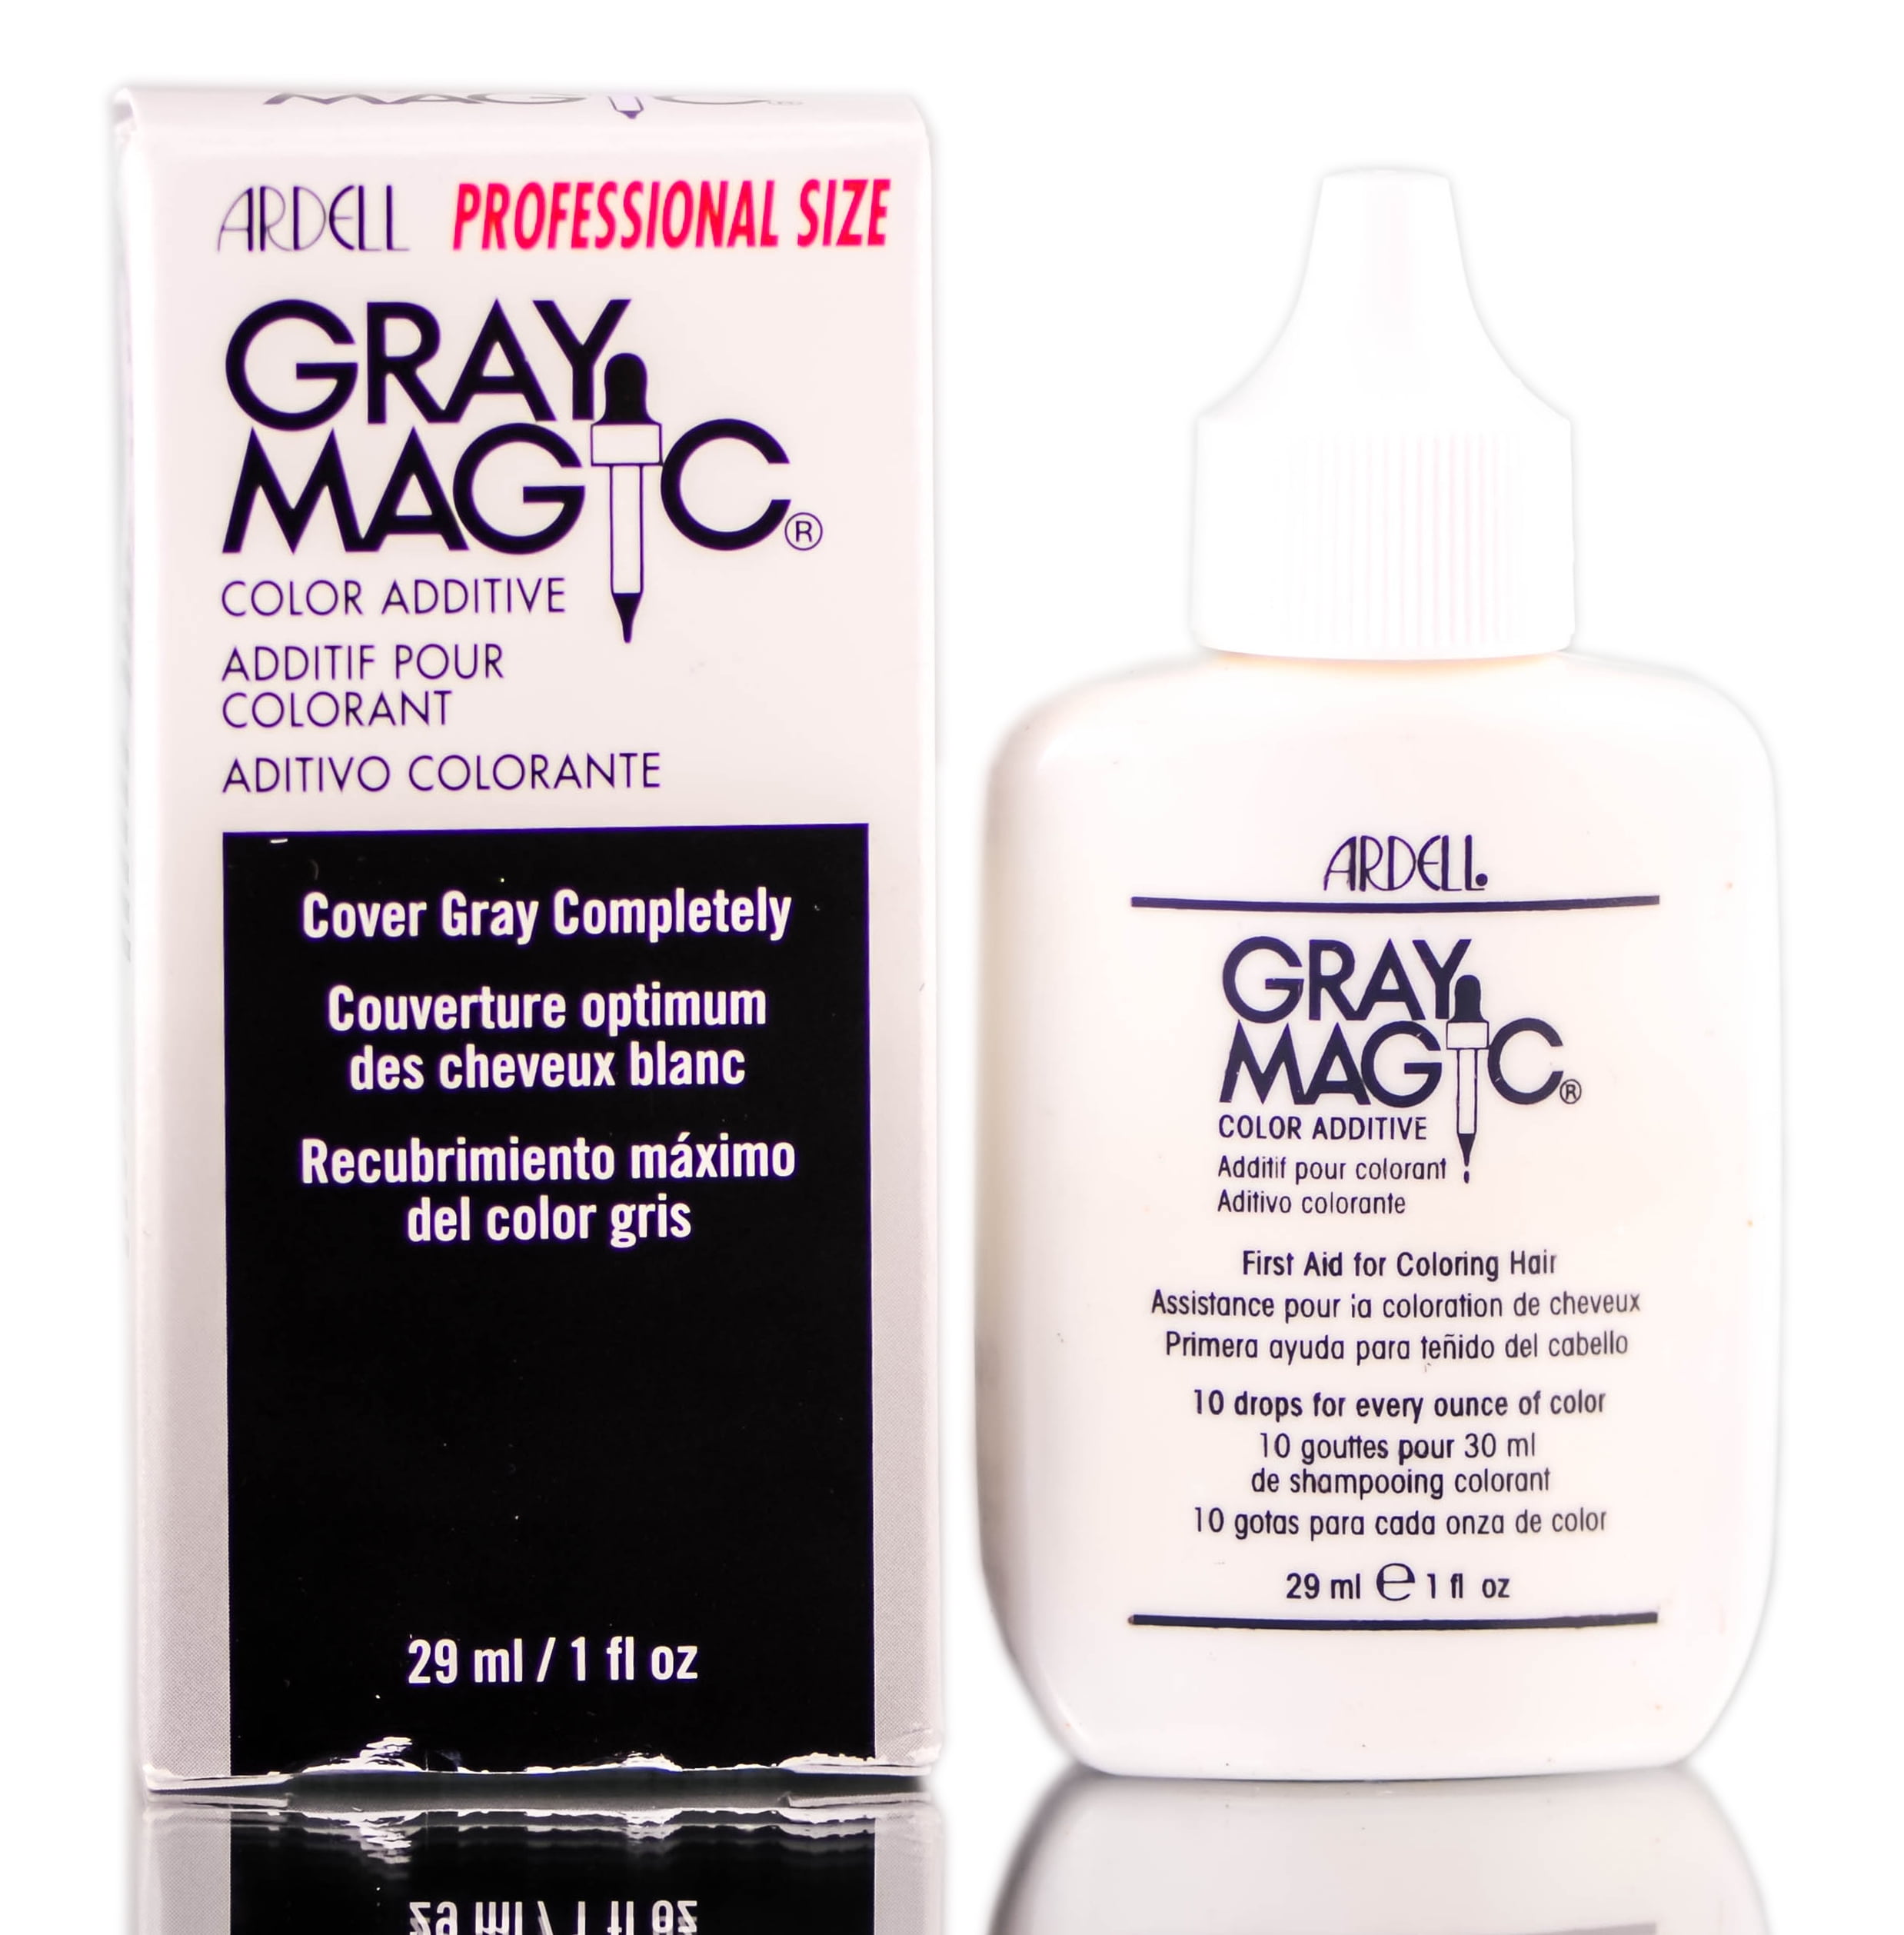 Ardell Gray Magic Color Additive - cover gray completely  oz - Pack of  2 with Sleek Comb 